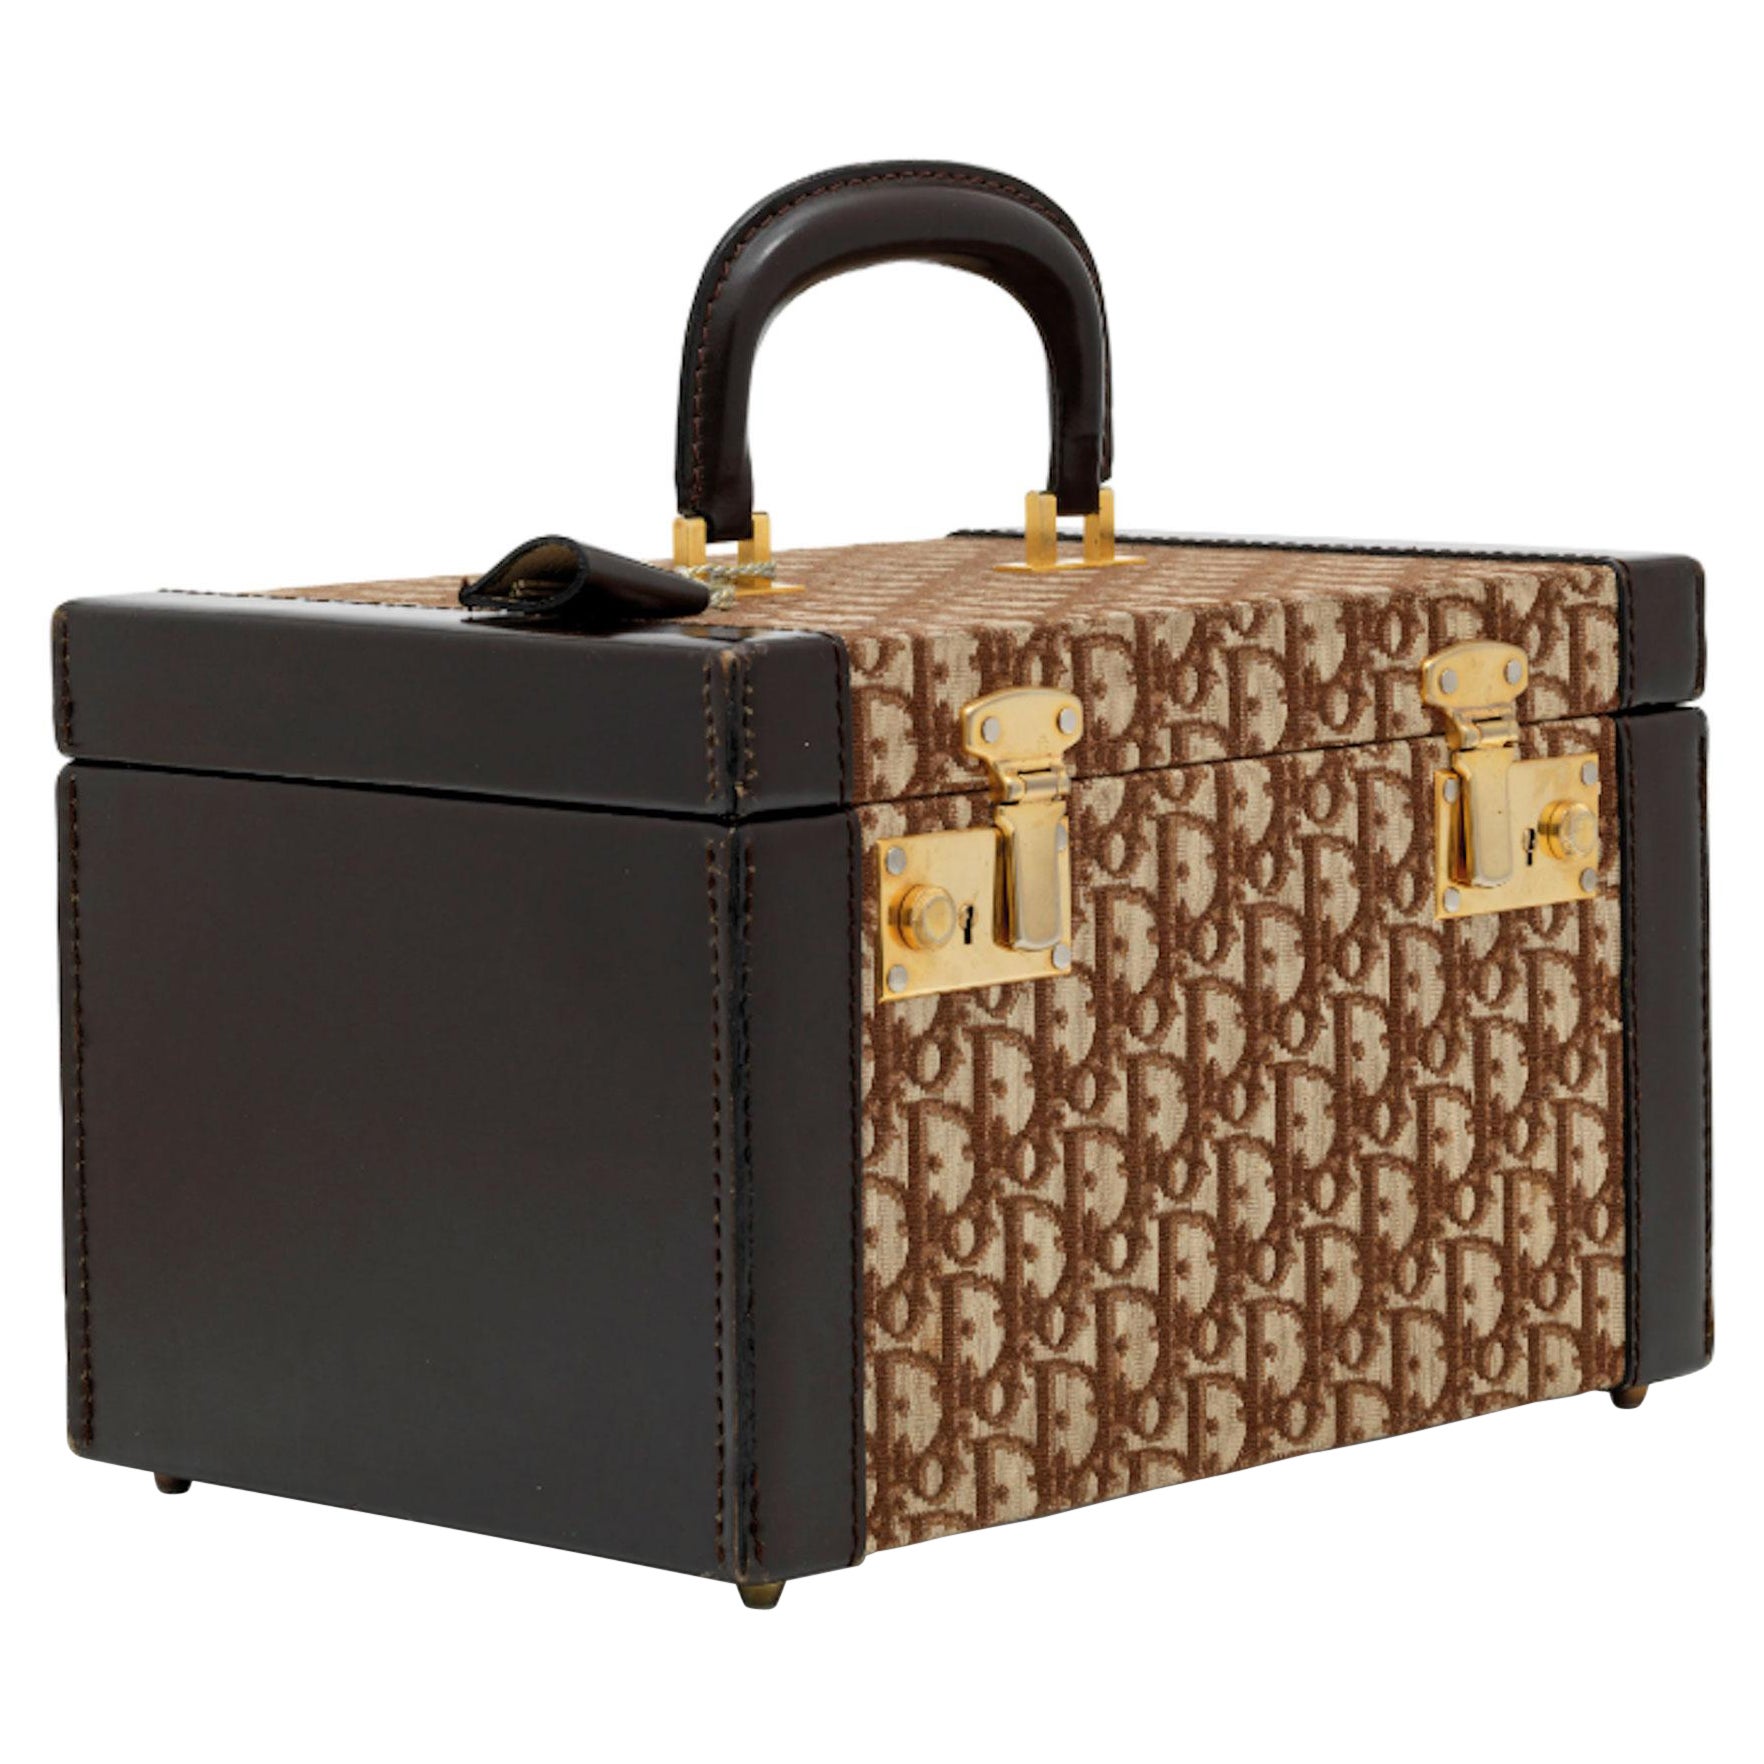 Christian Dior Vintage Logomania Vanity Case Trunk

1990-2000 {VINTAGE 25 Years}
Soft Gold Hardware
Dior logo print
Lockable case, comes with key
12” W x 7.5” H x 8” D
Top handle 3”

Made in France